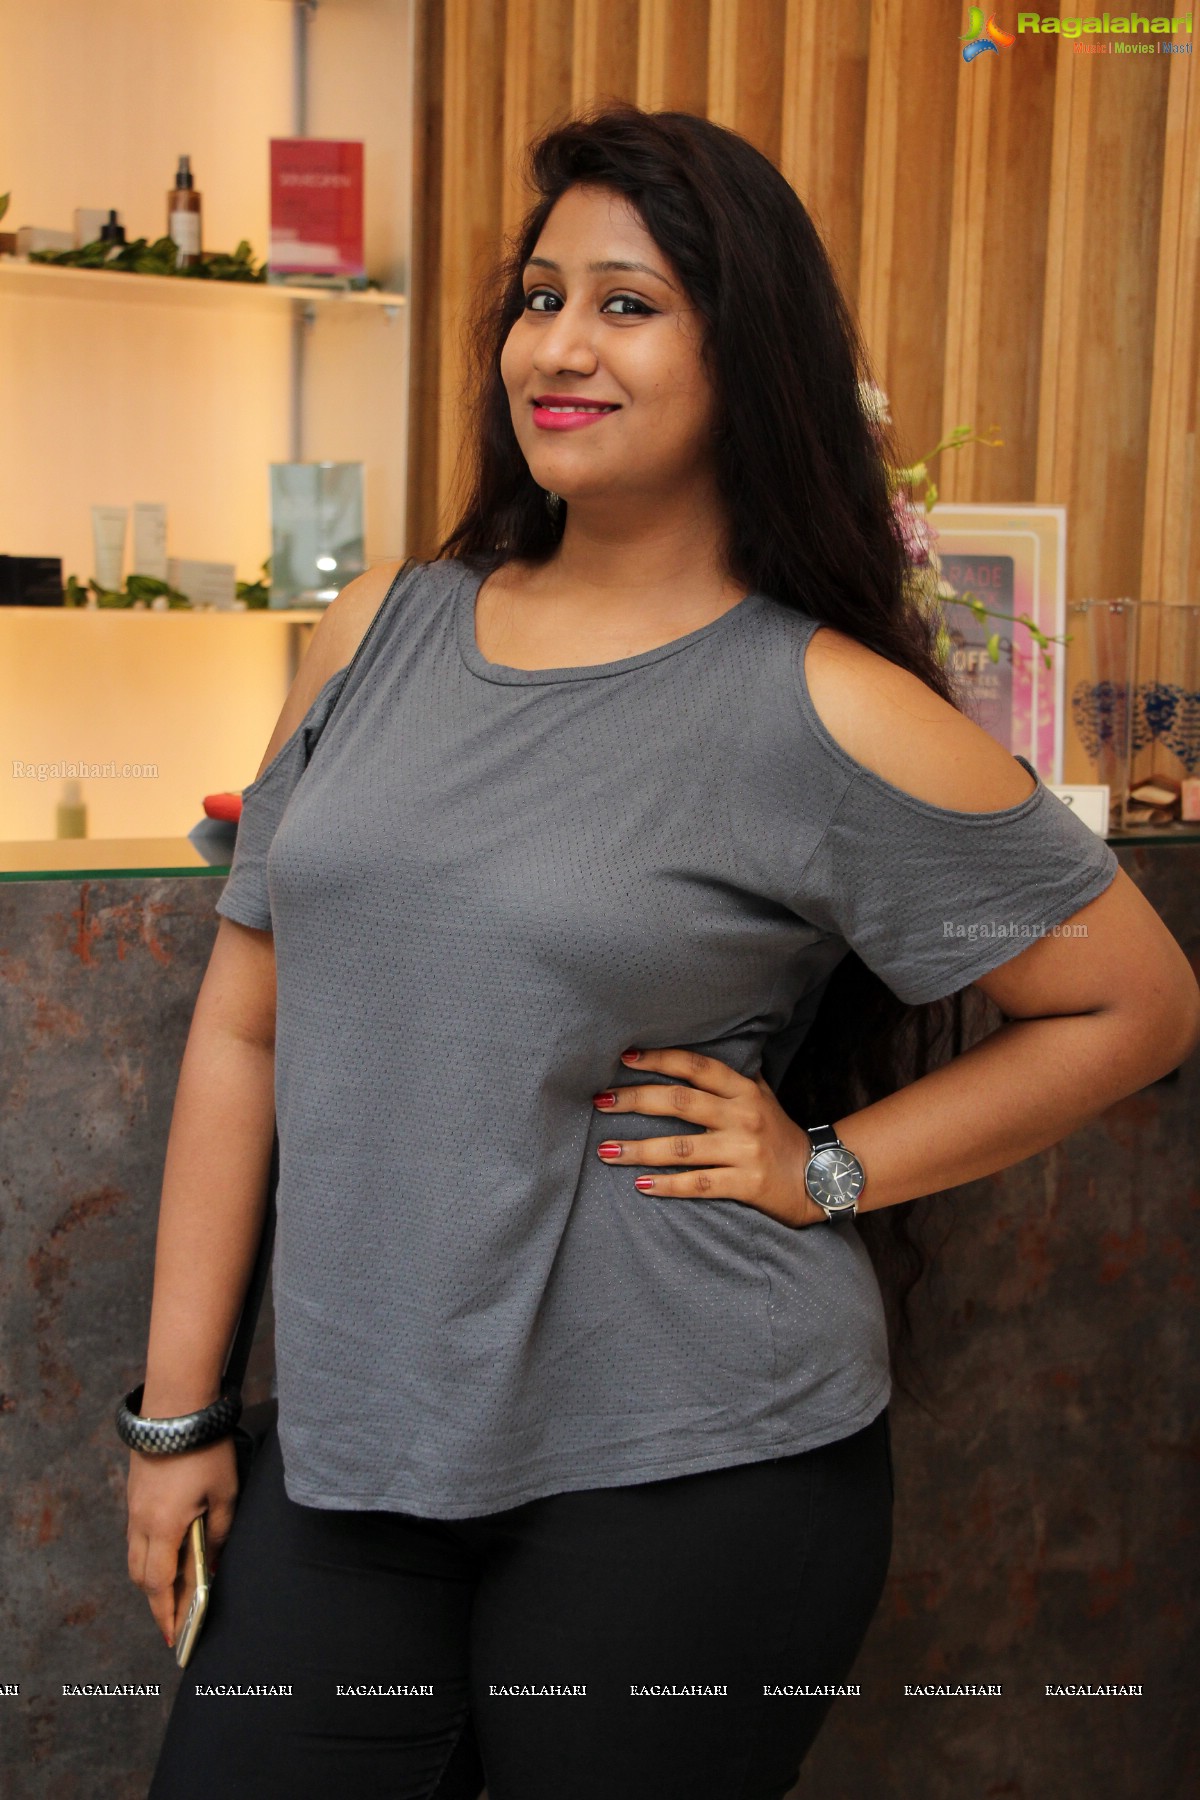 Spalon India launches its Flagship Salon Bounce Salon & Spa at Jubilee Hills